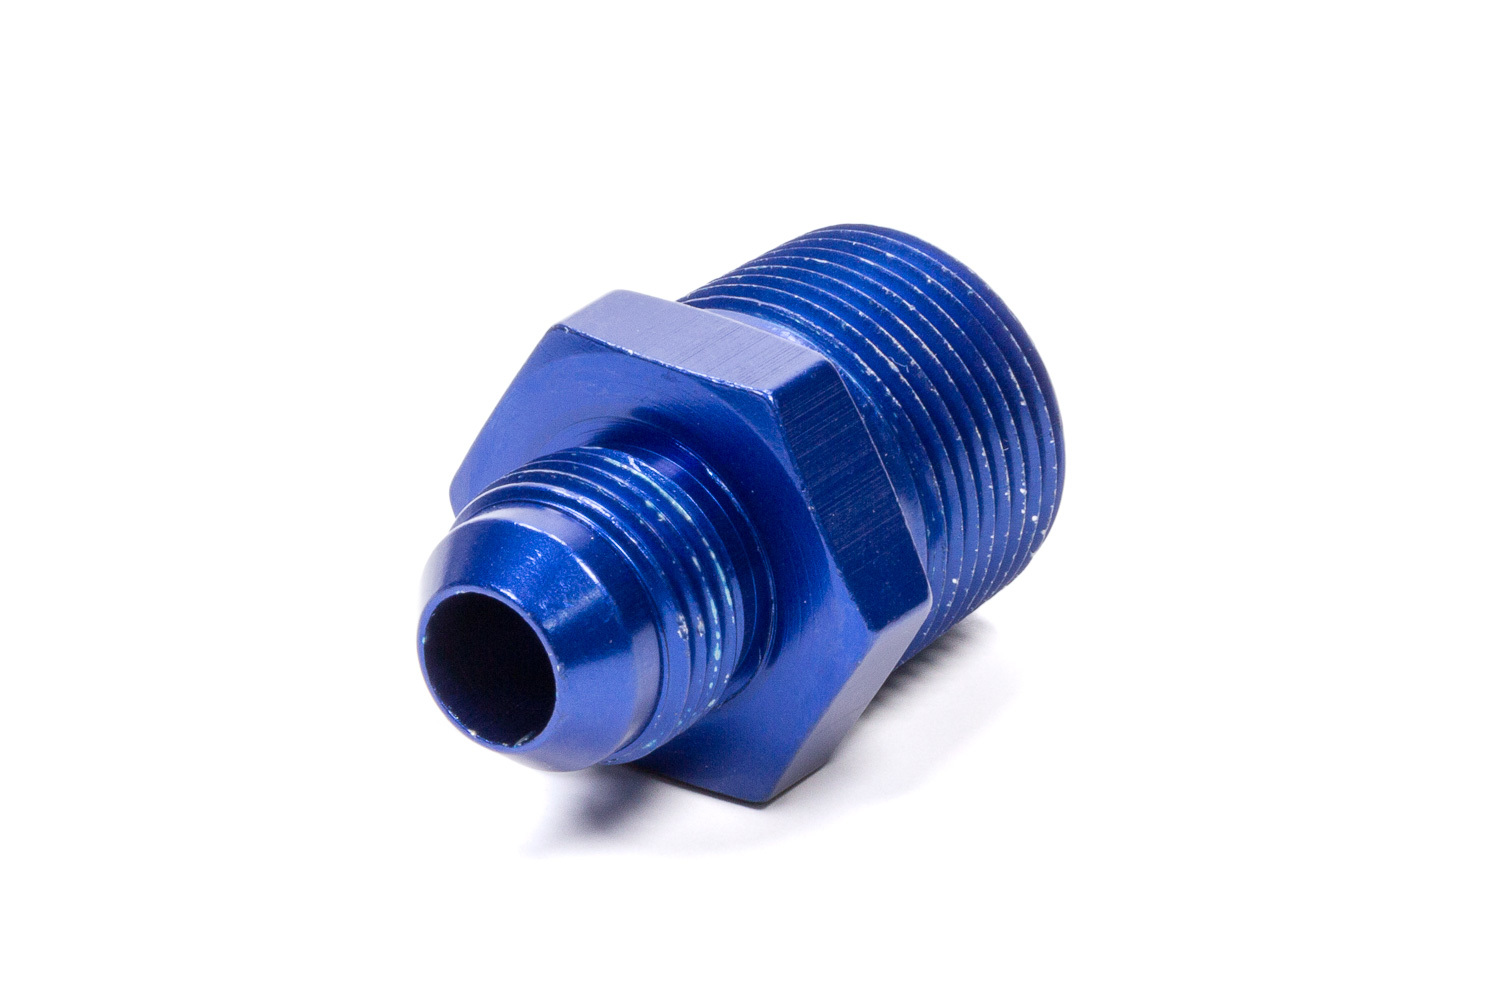 Fragola 481616 Fitting, Adapter, Straight, 16 AN Male to 1 in NPT Male, Aluminum, Blue Anodized, Each